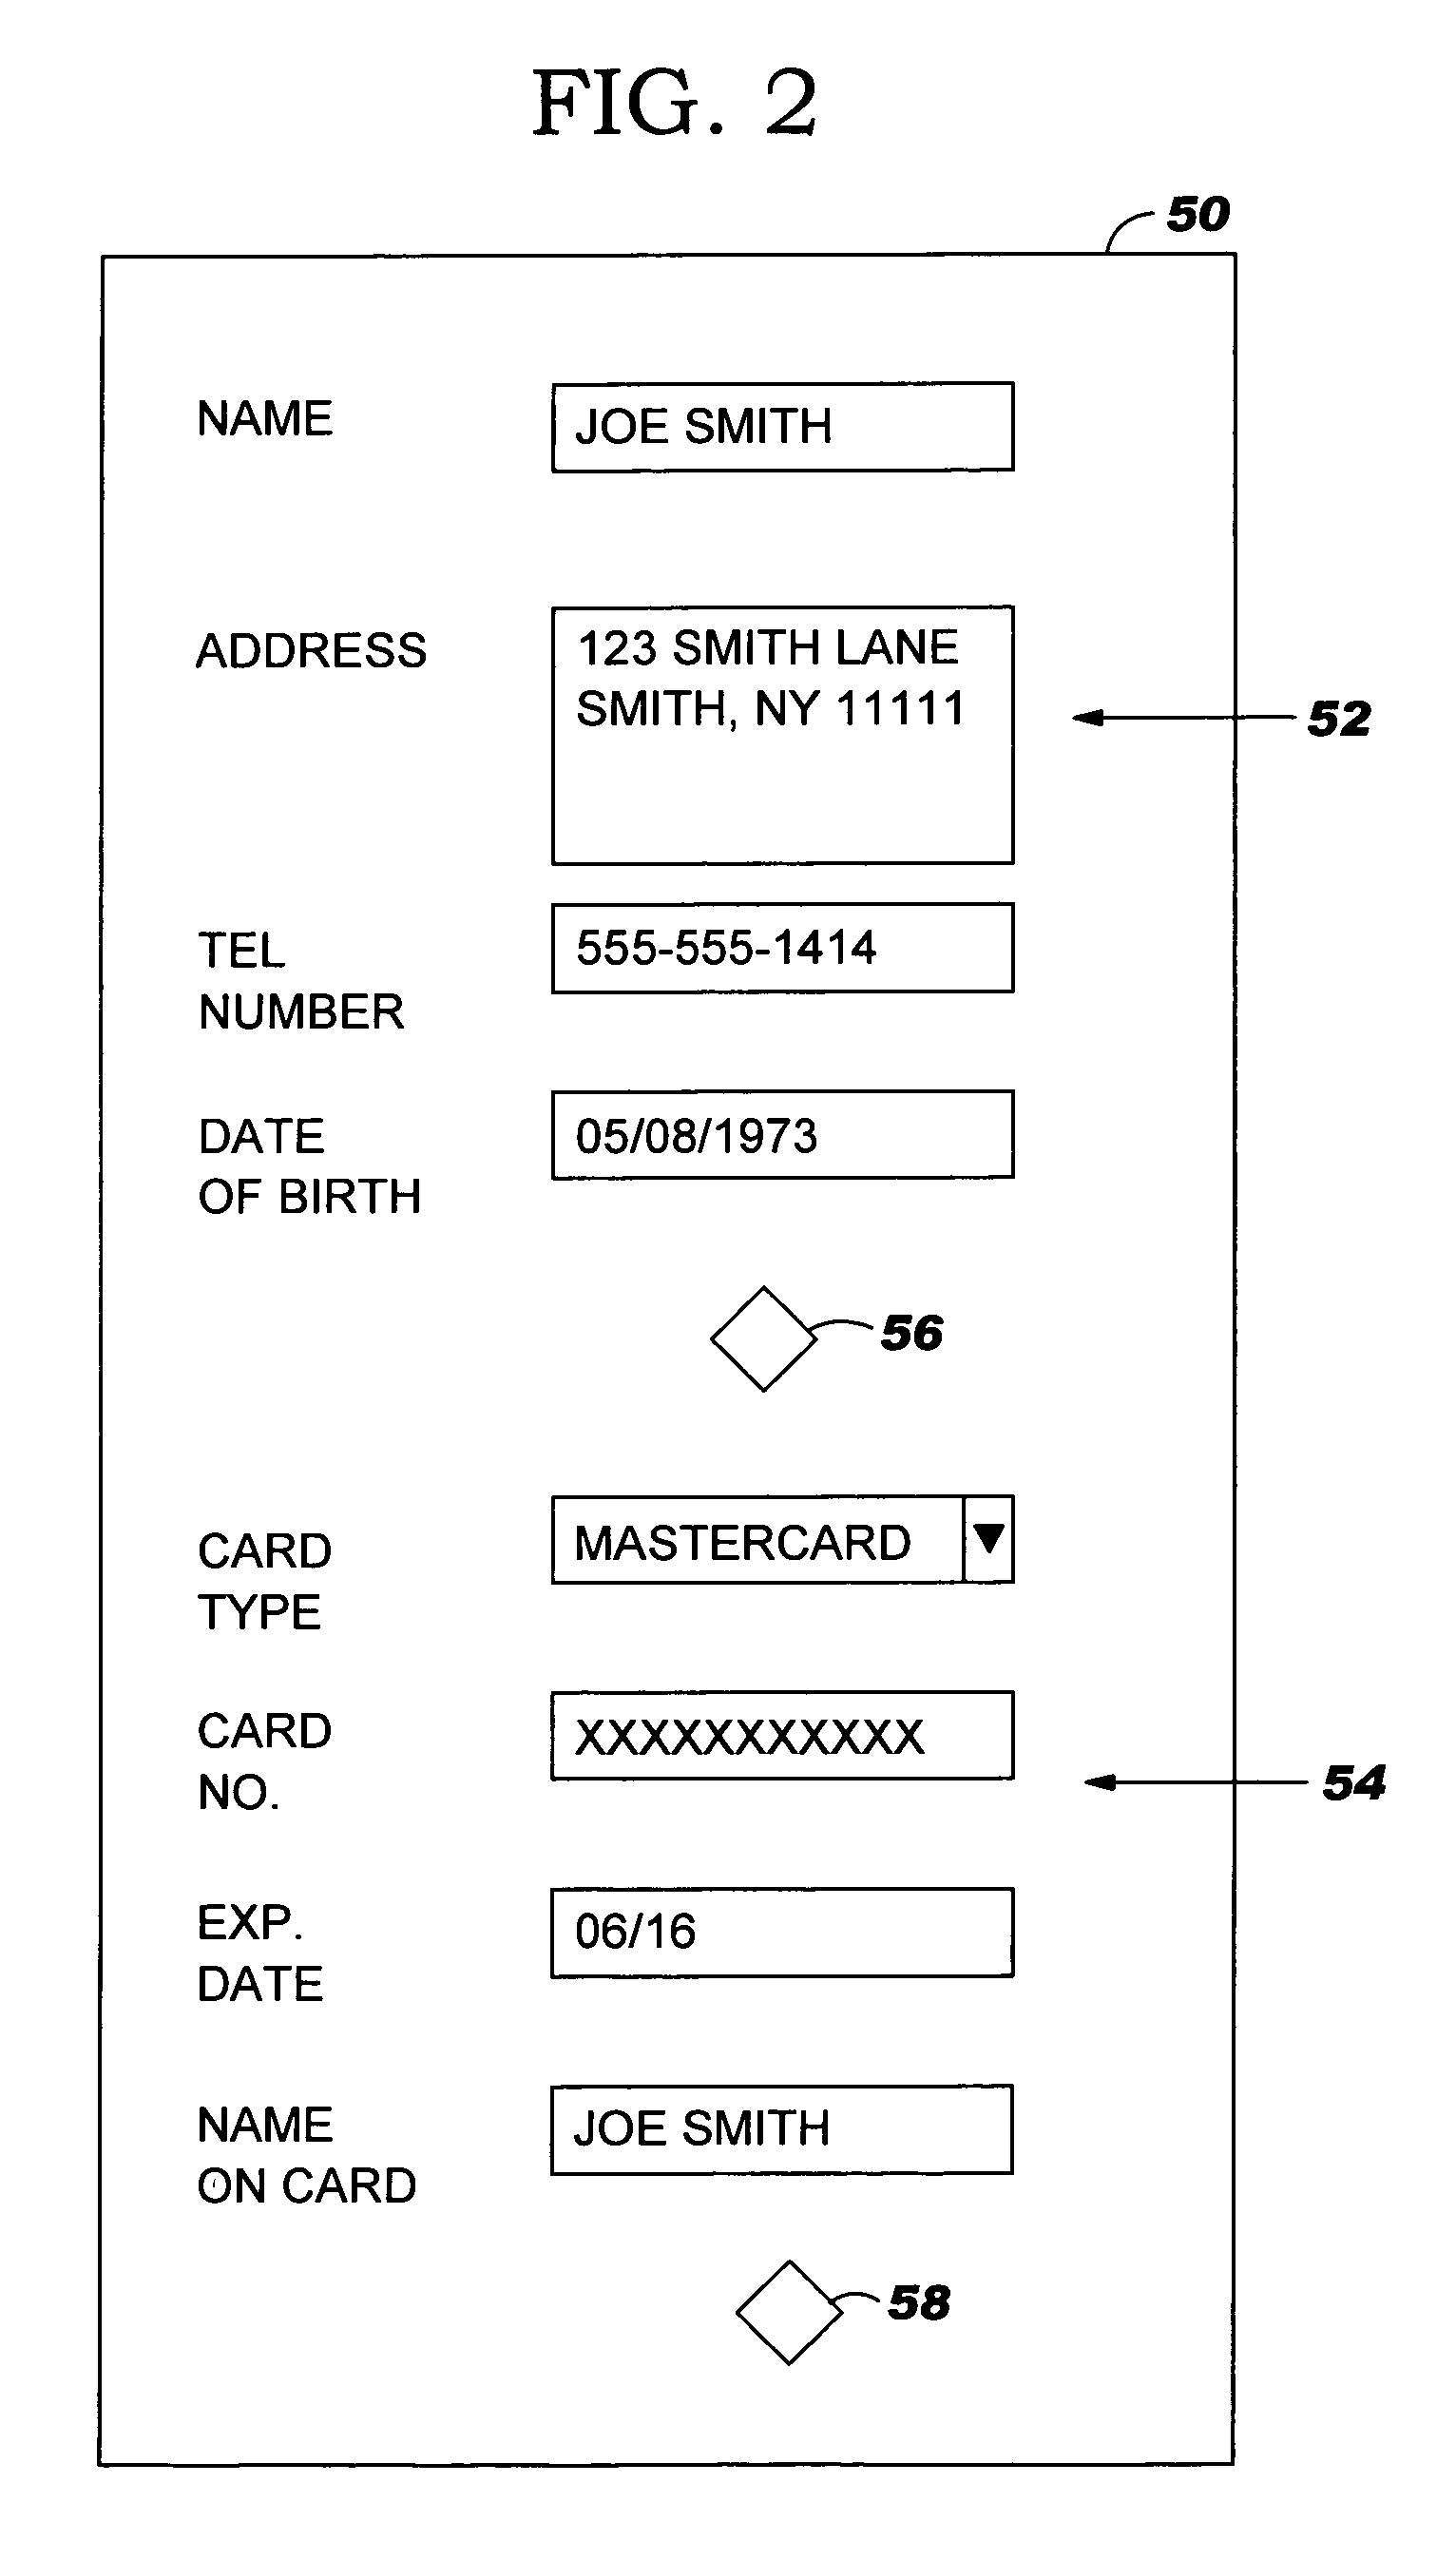 Method, system and program product for preserving a user state in an application